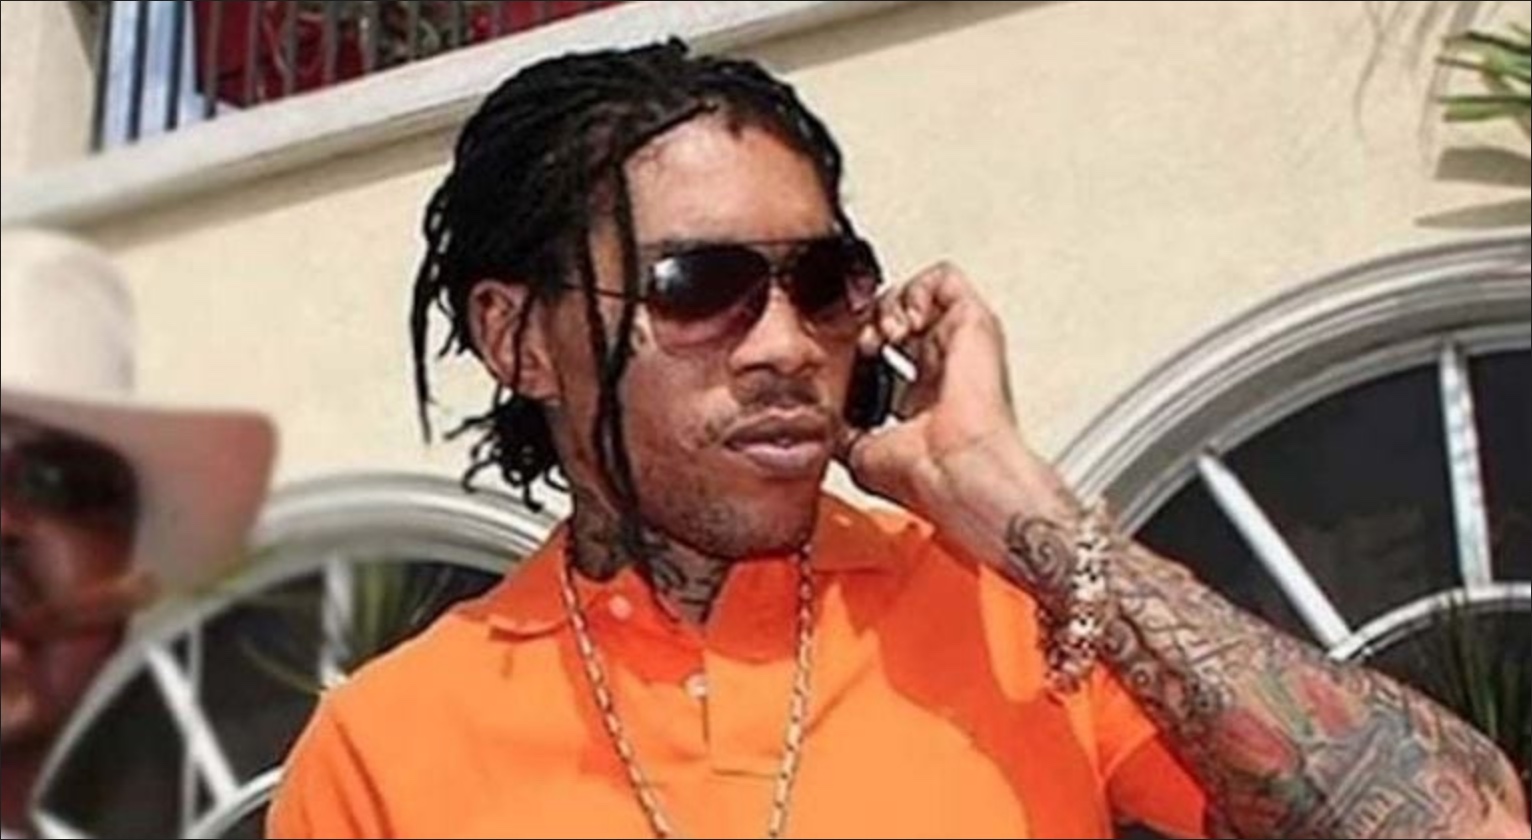 Prison Officials Deny Putting Kartel on Lockdown; Confirm Phones Were Found on Deejay